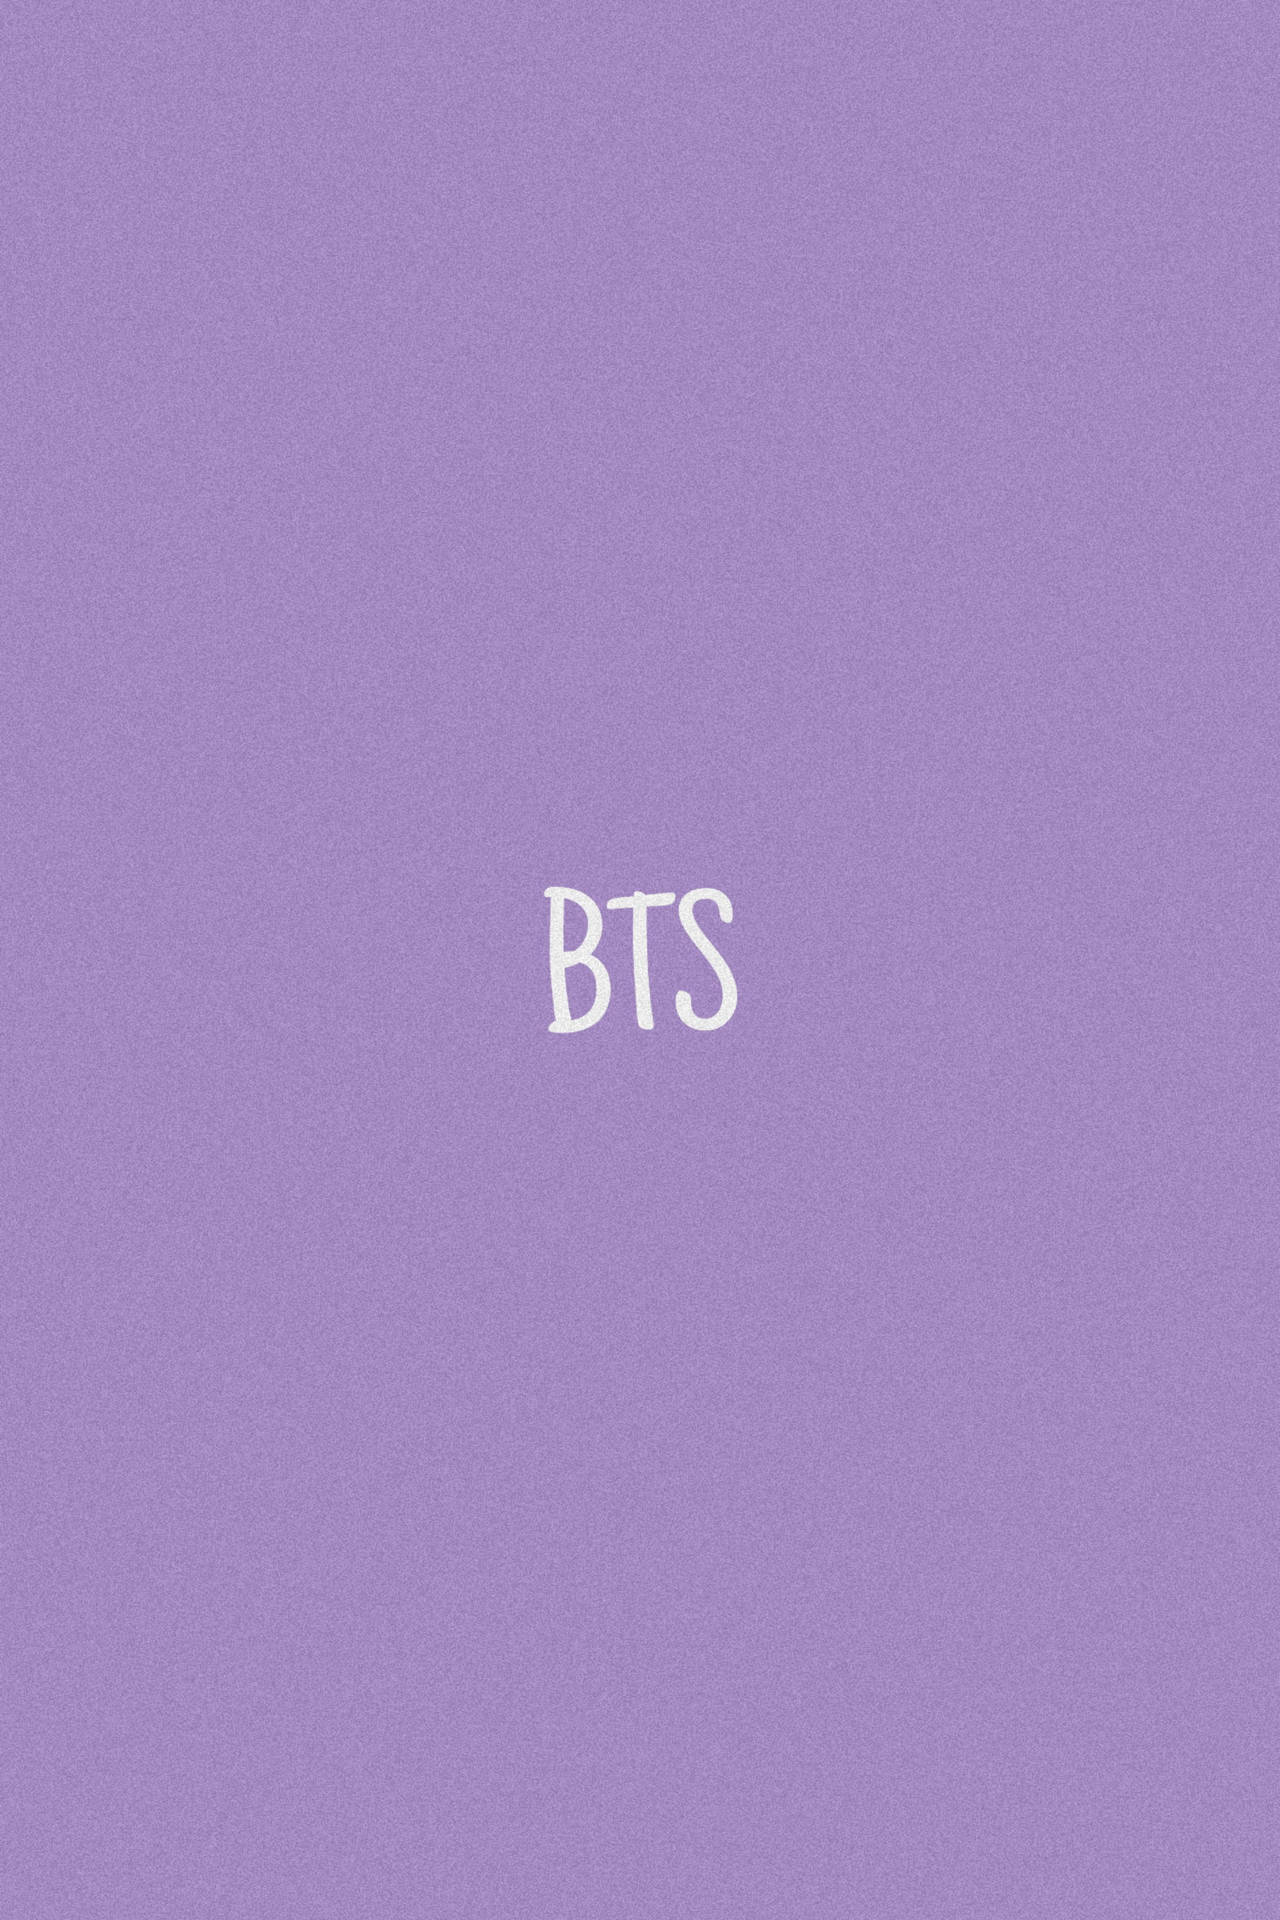 A purple background with the letters BTS in white - Purple, cute purple